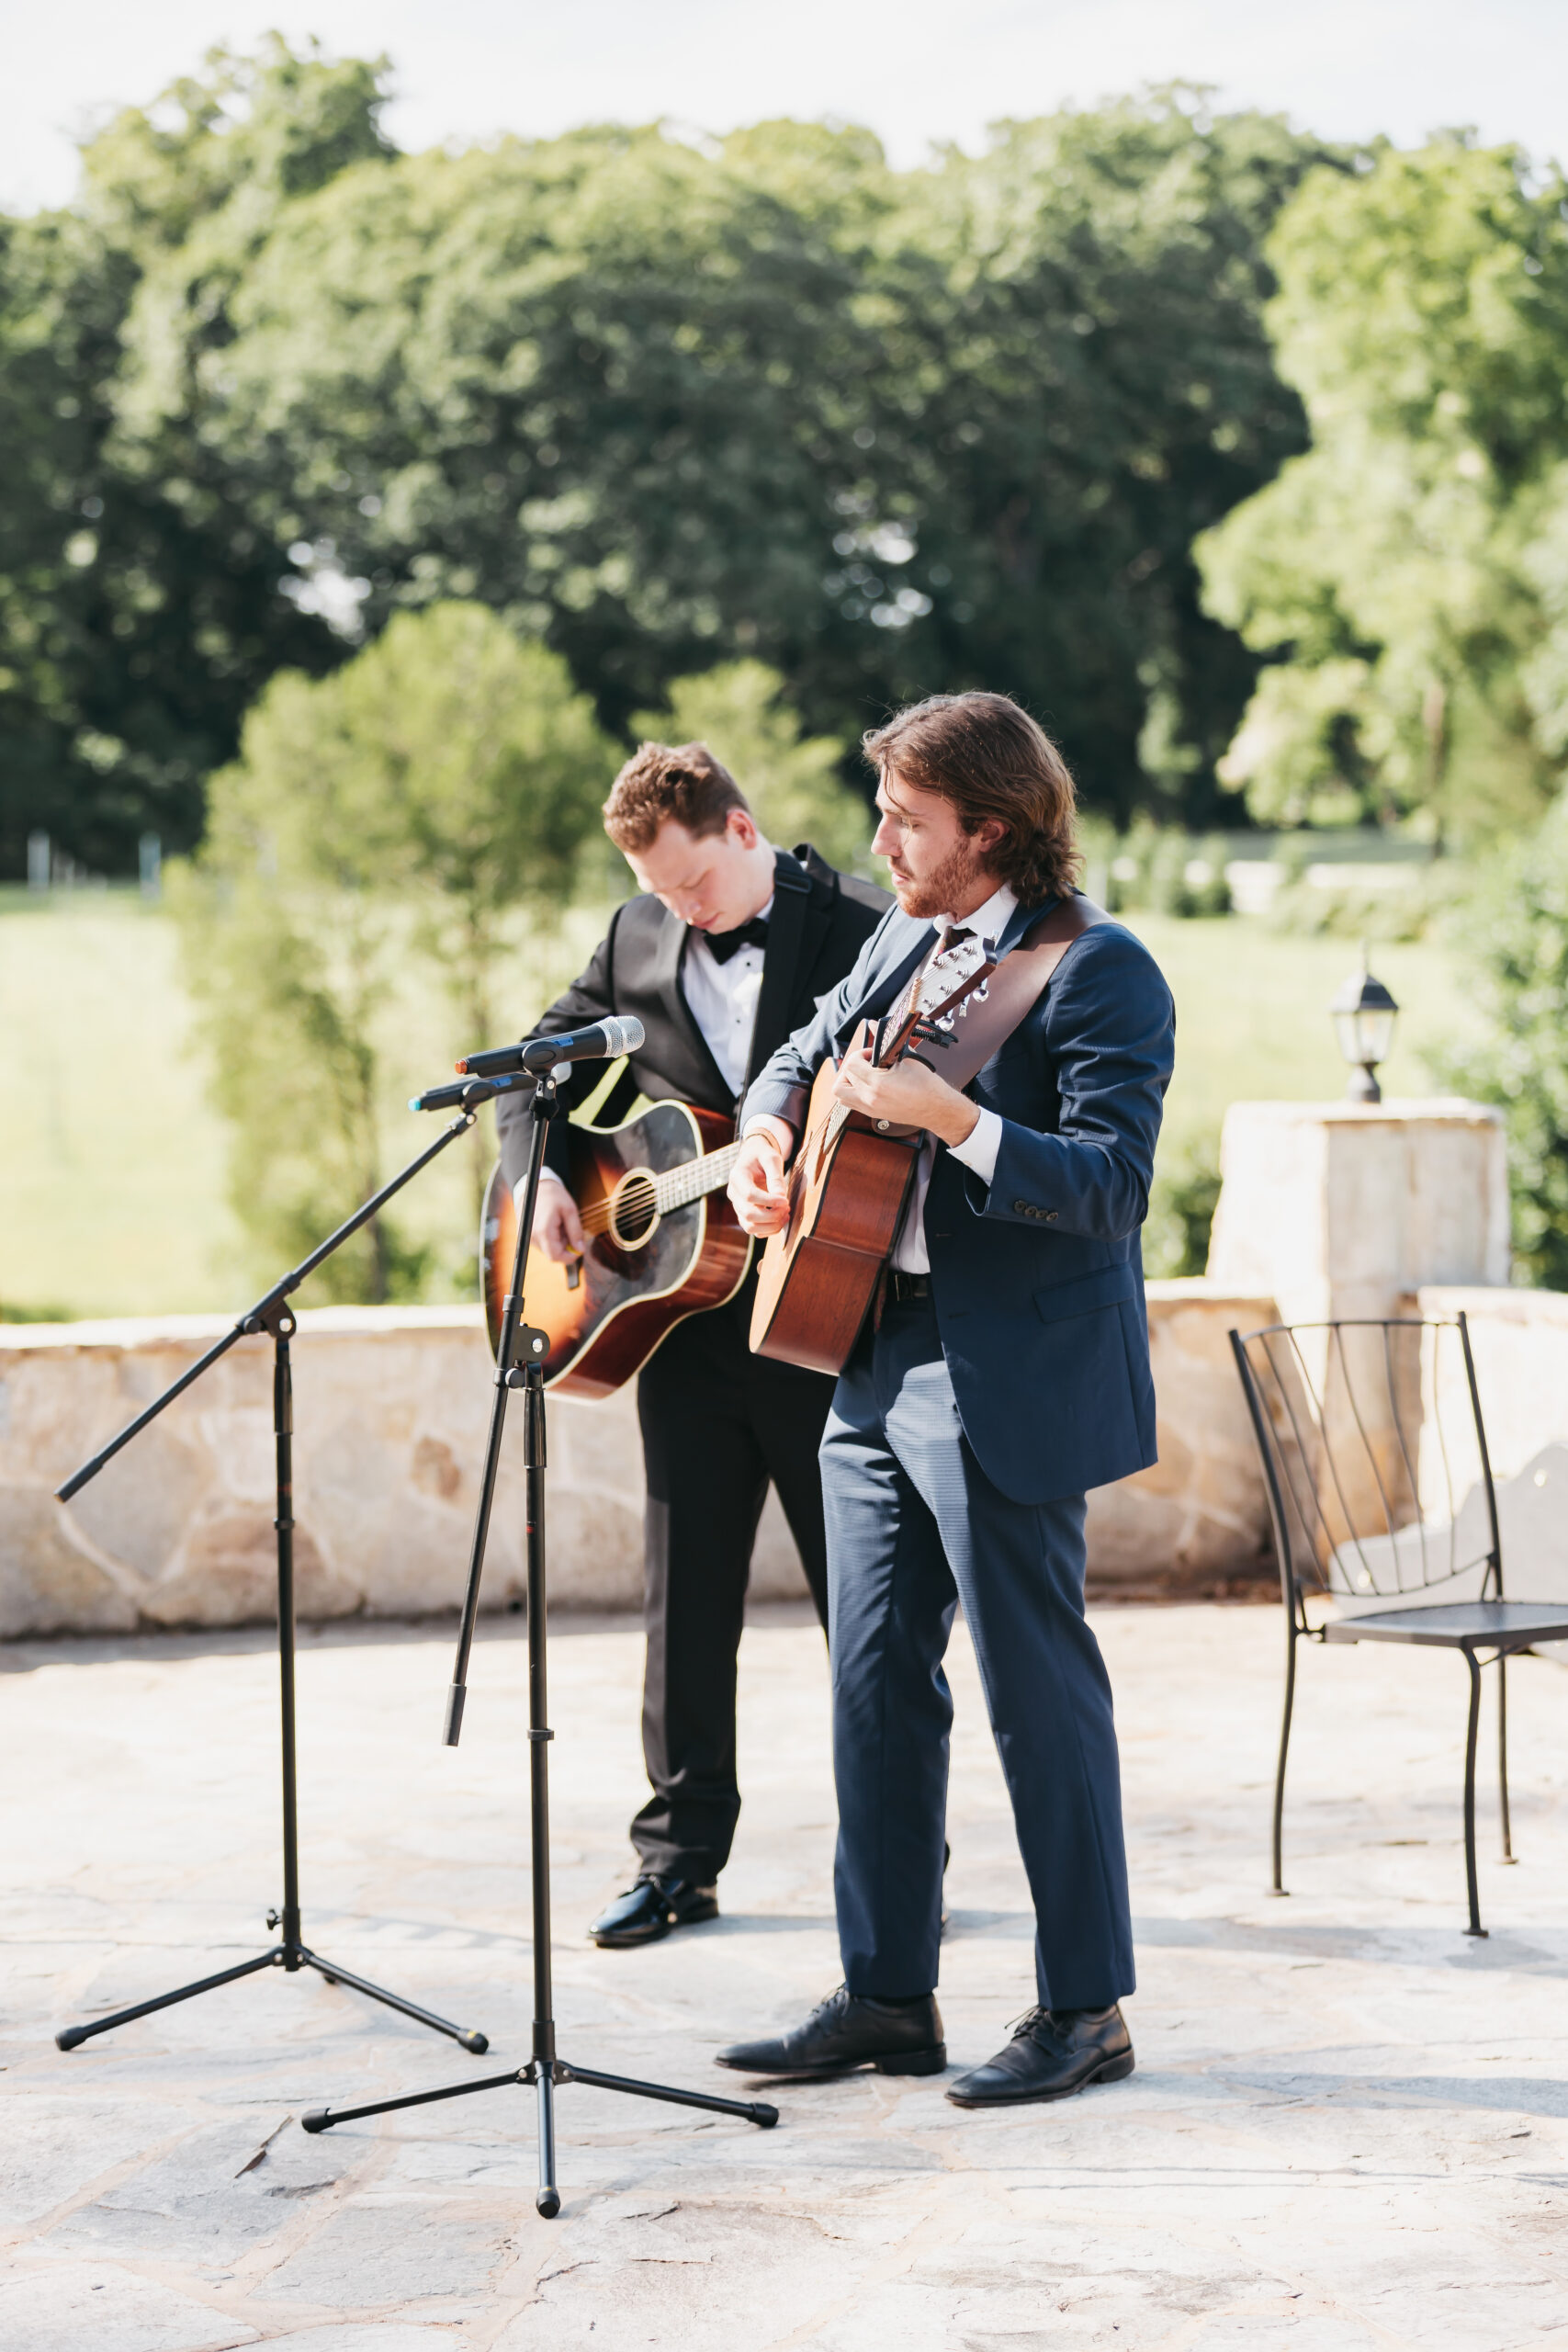 Wedding band serenading the crowd during the ceremony, shot by Virginia wedding photographer Rachel Yearick